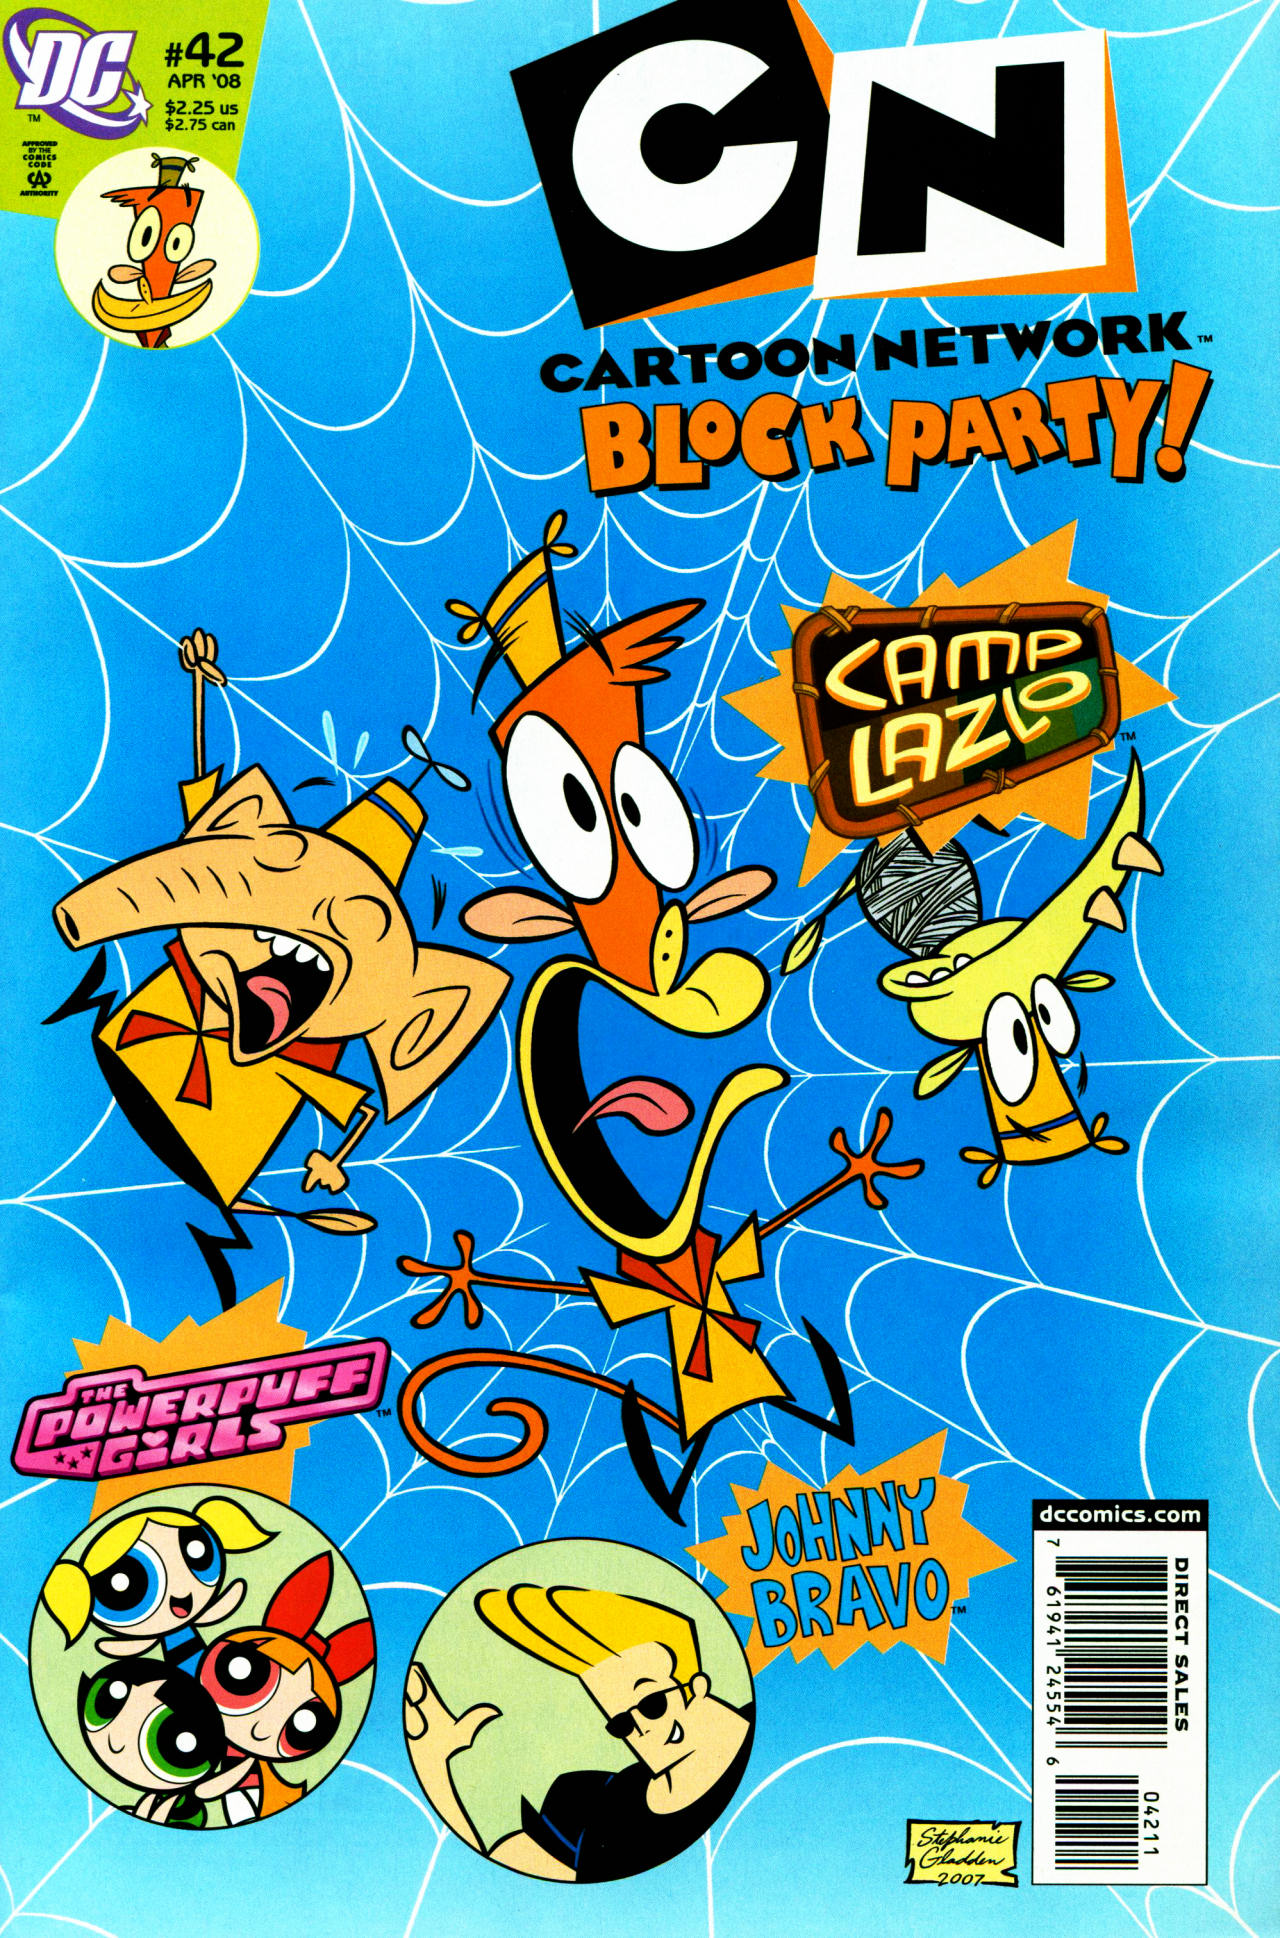 Read Cartoon Network Block Party Issue #42 Online